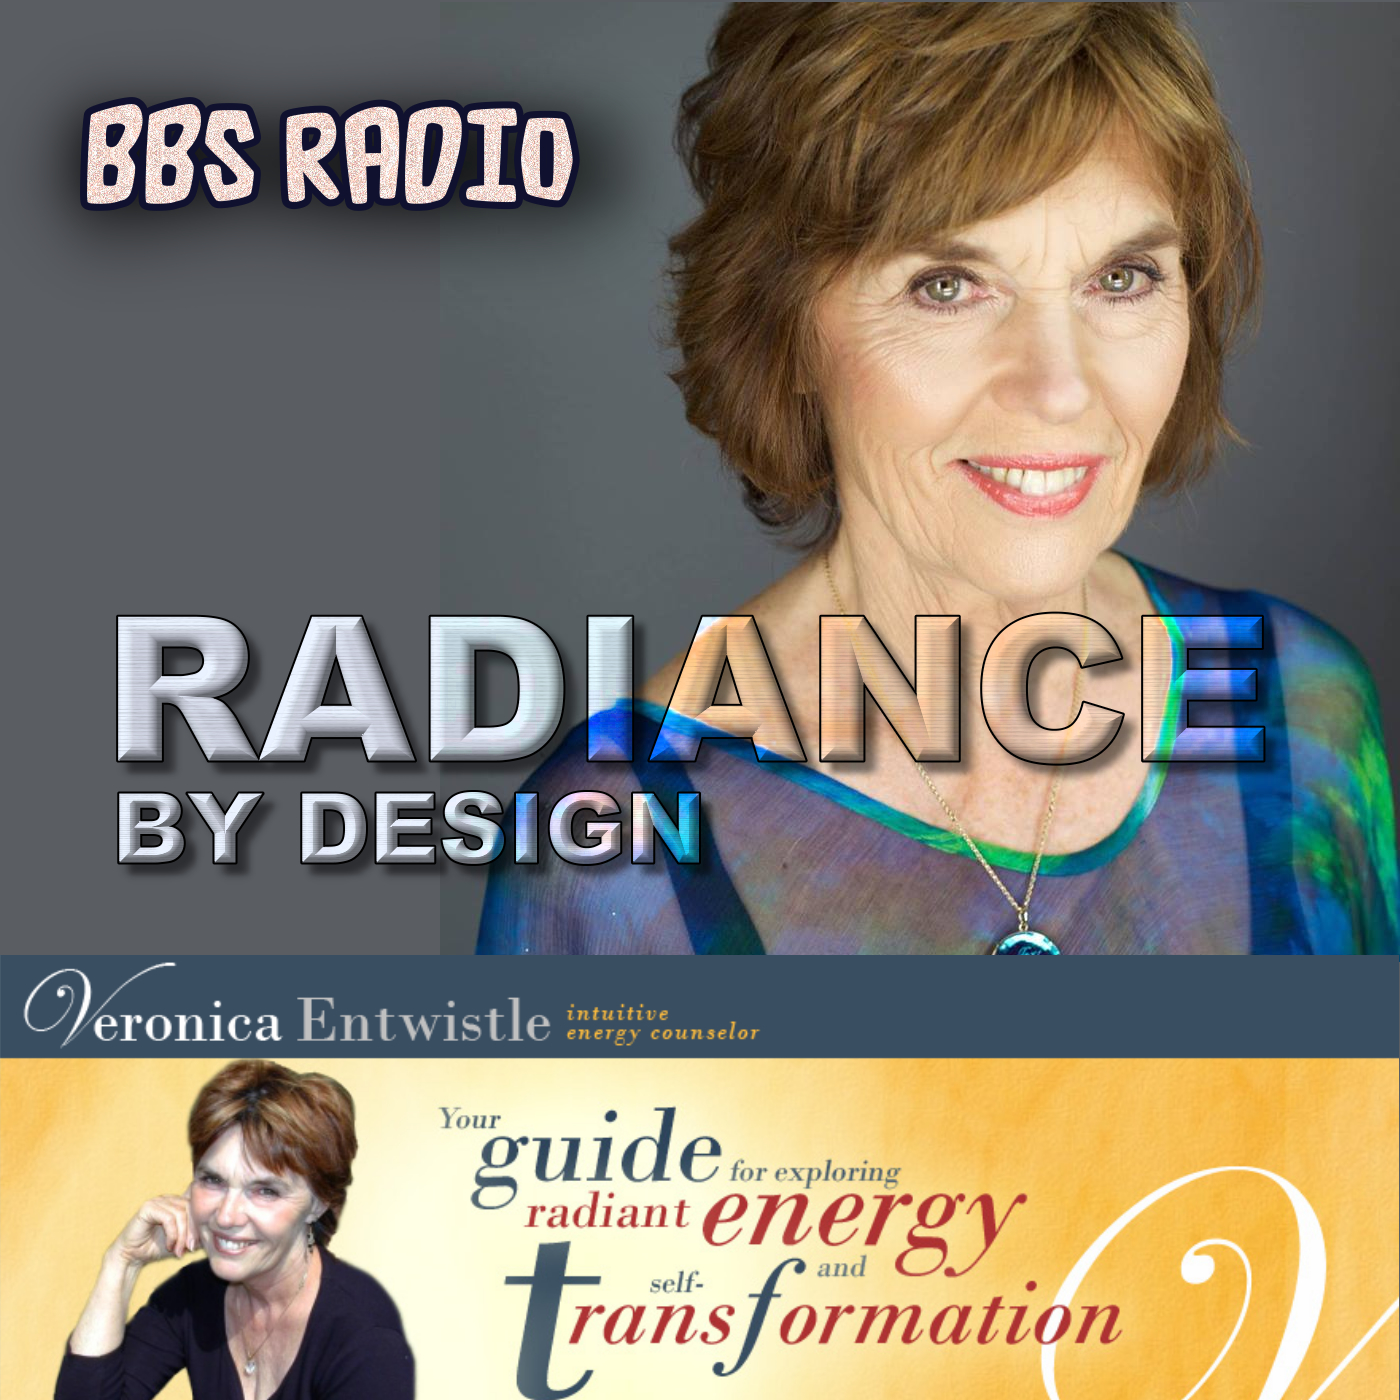 Radiance By Design with Veronica Entwistle:BBS Radio, BBS Network Inc.